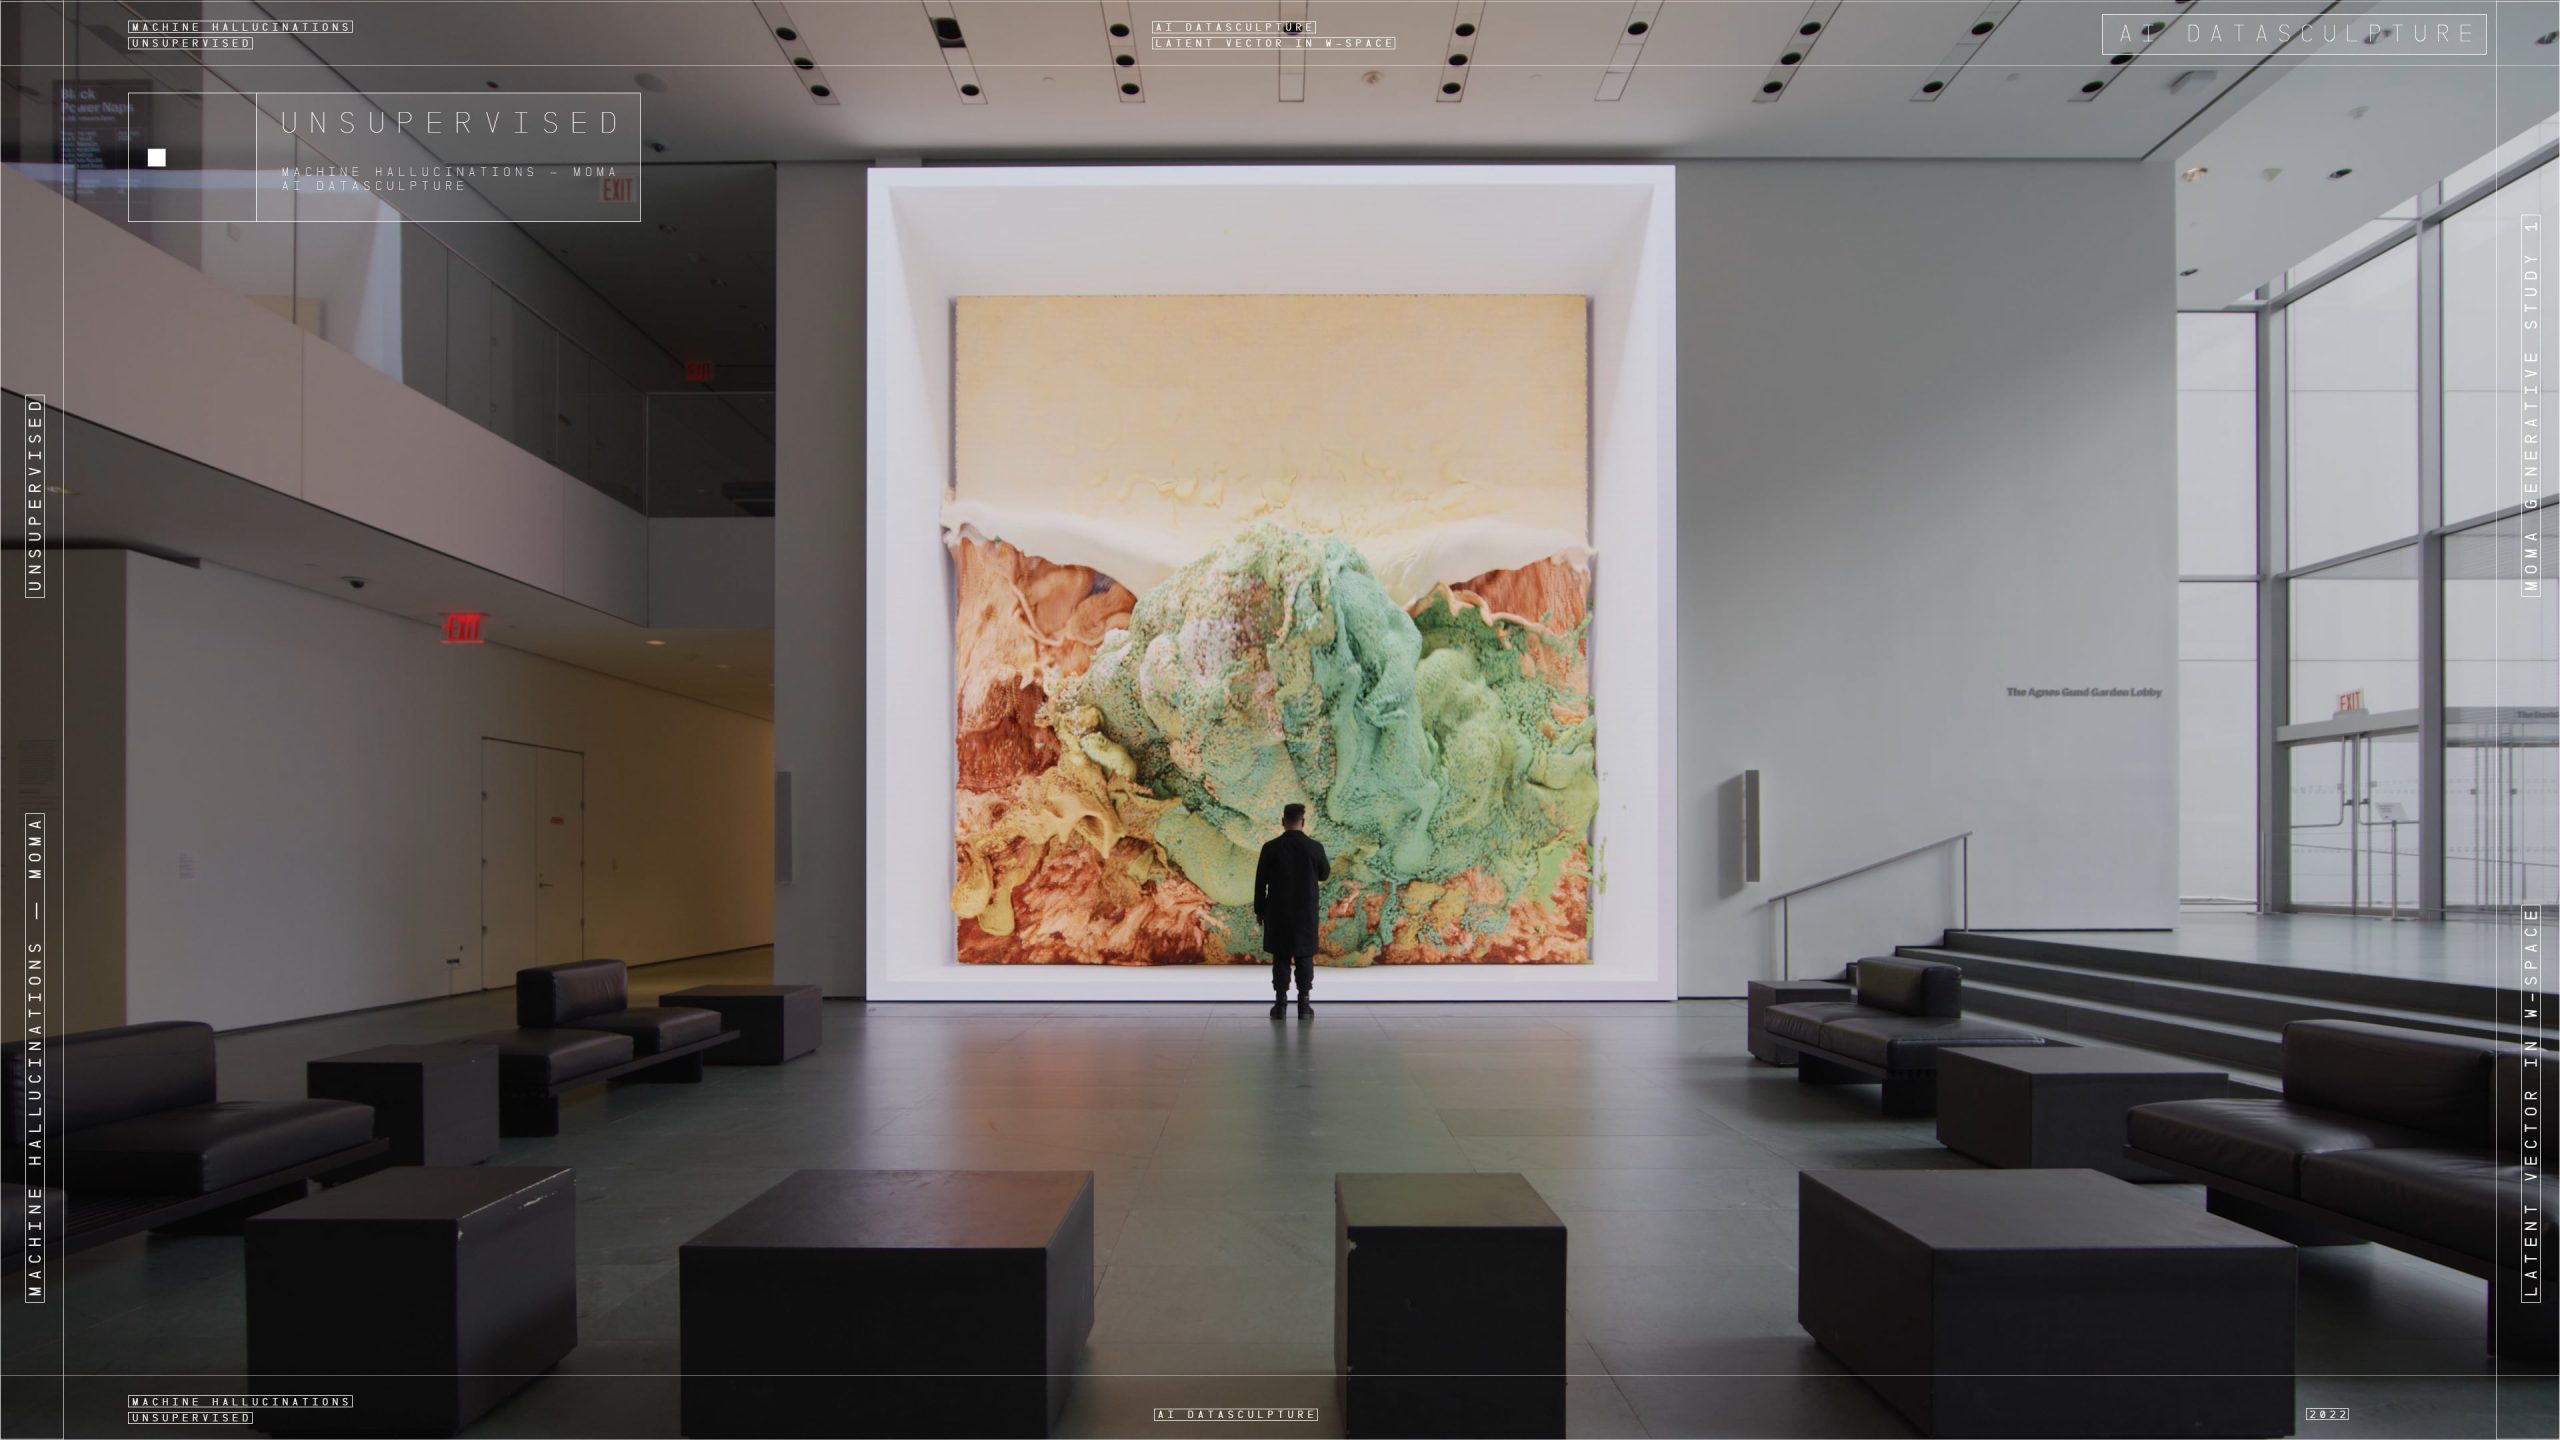 MoMa Makes History Acquiring Refik Anadol's A.I. Generated Tokenized (NFT) Art to Their Permanent Collection